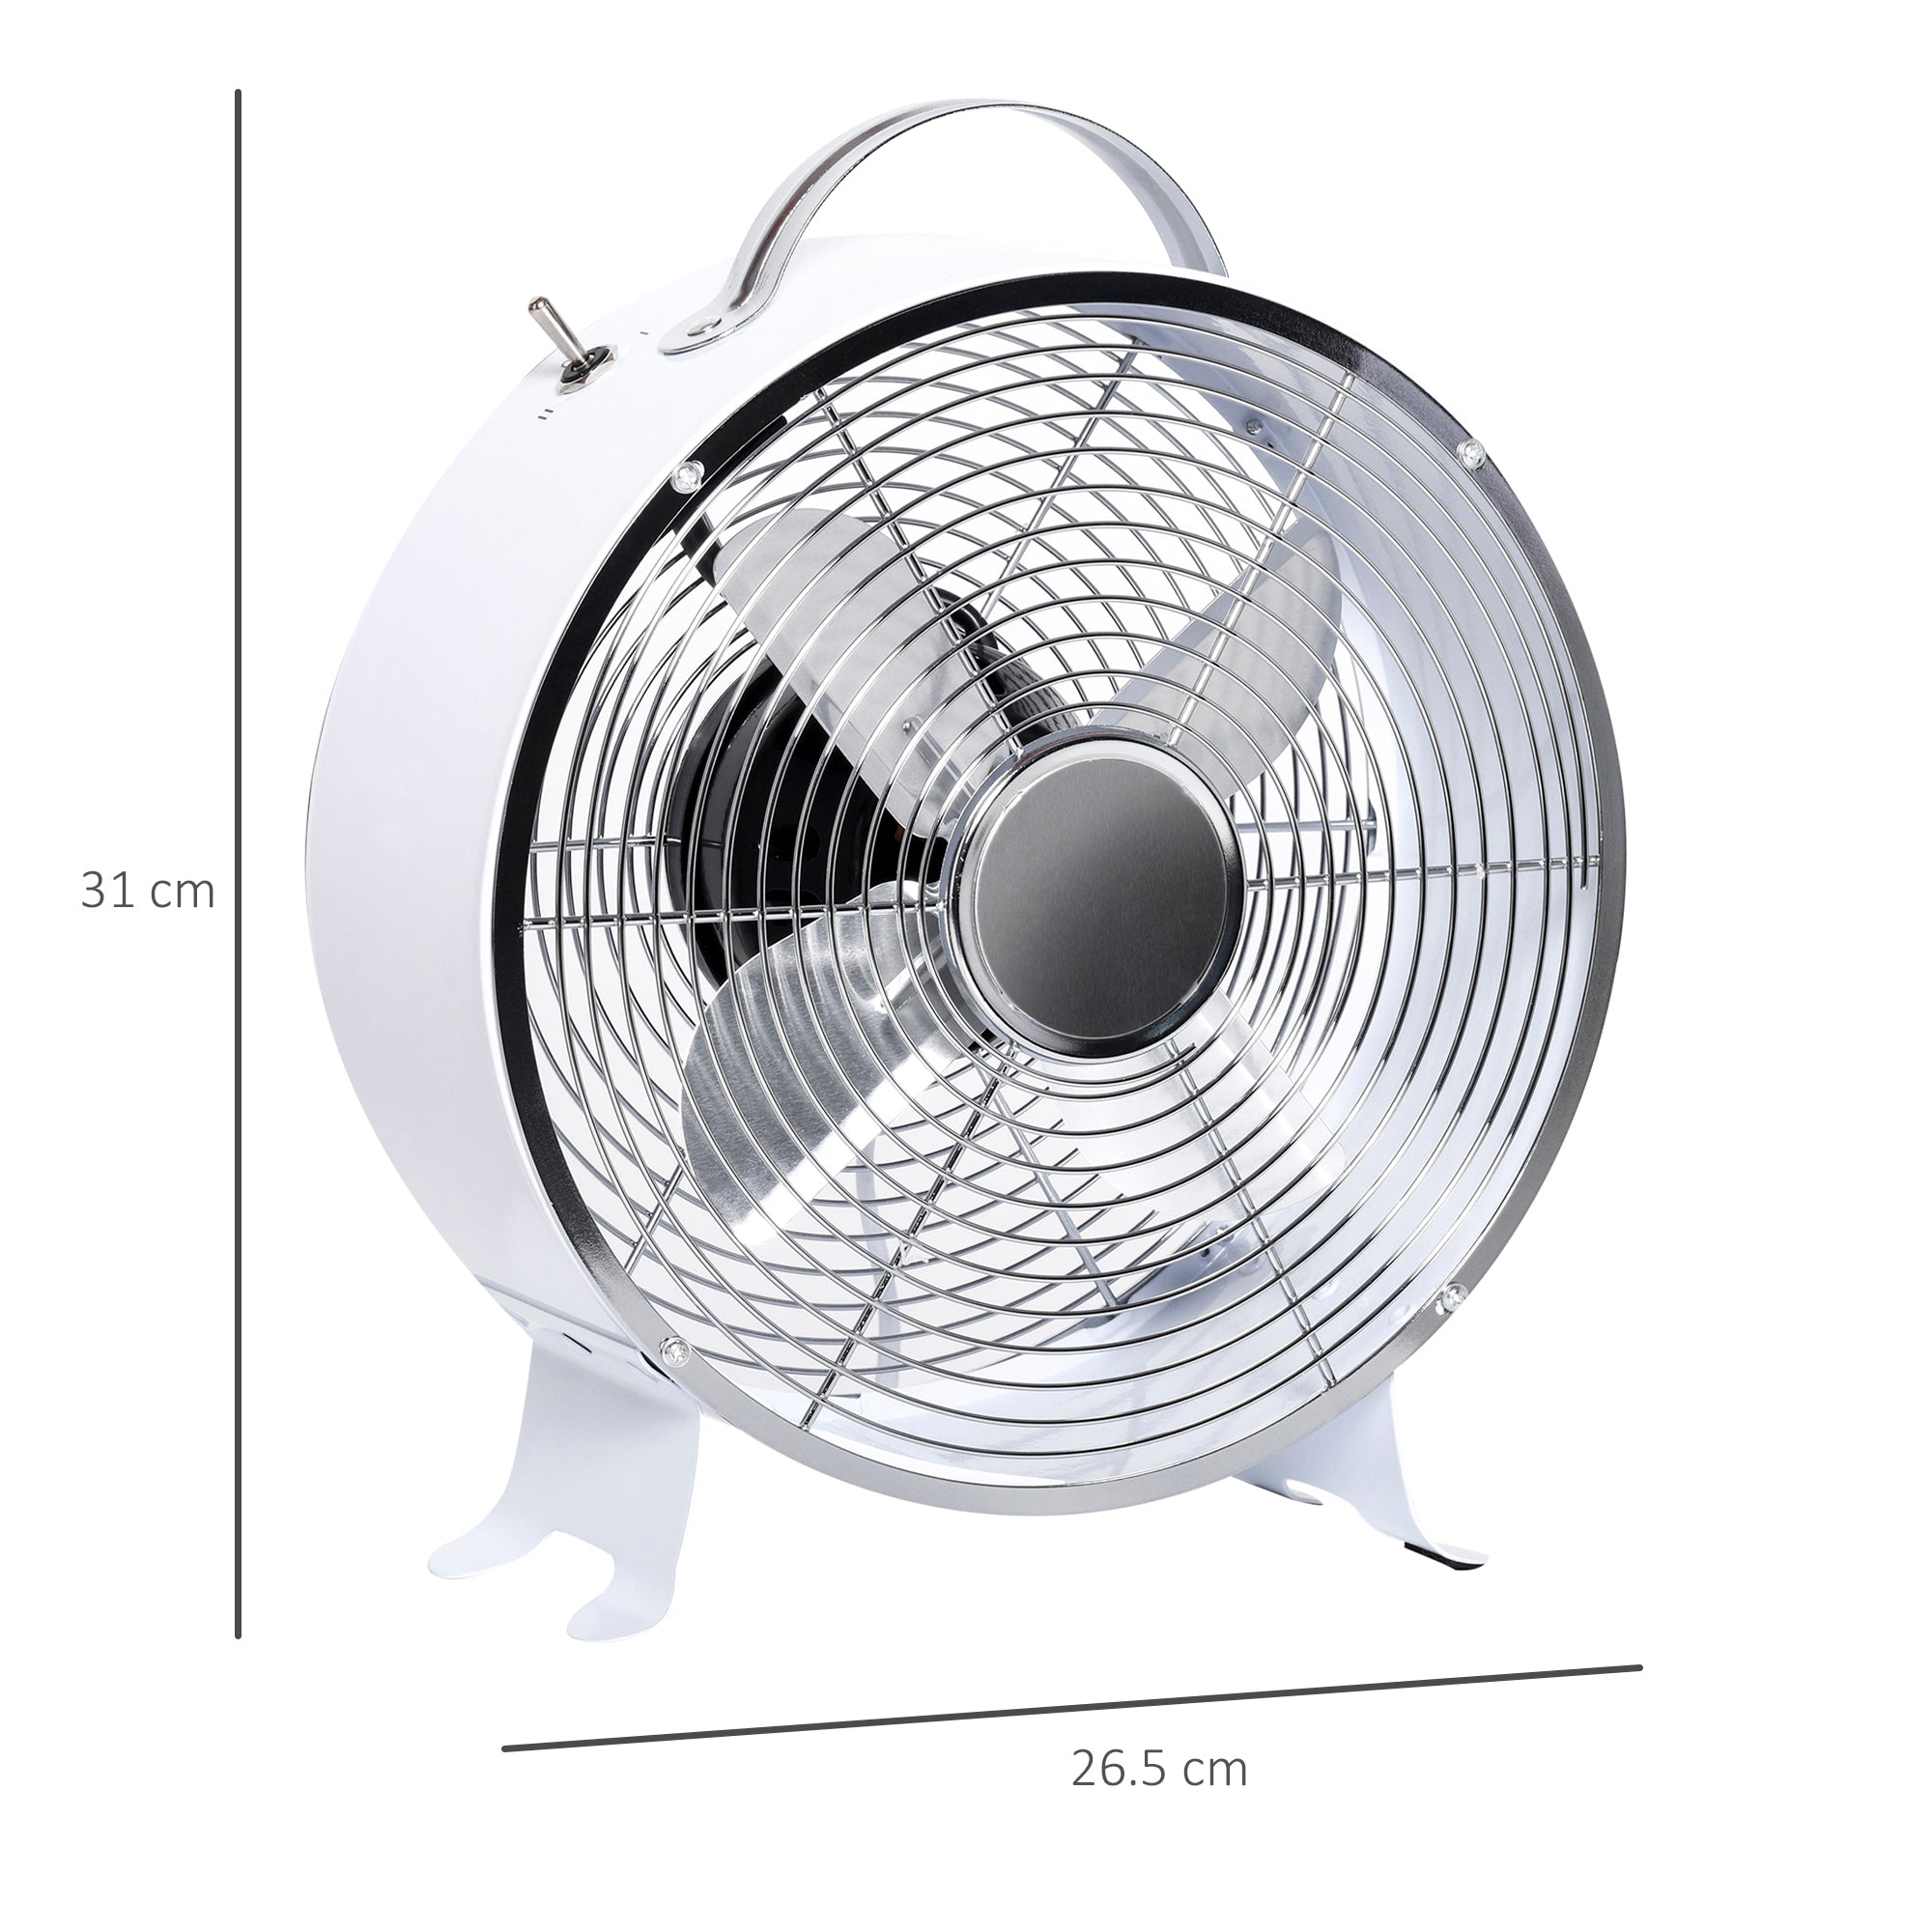 HOMCOM 26cm 2-Speed Electric Table Desk Fan w/ Safety Guard Anti-Slip Feet Portable Personal Cooling Fan Home Office Bedroom White - Inspirely